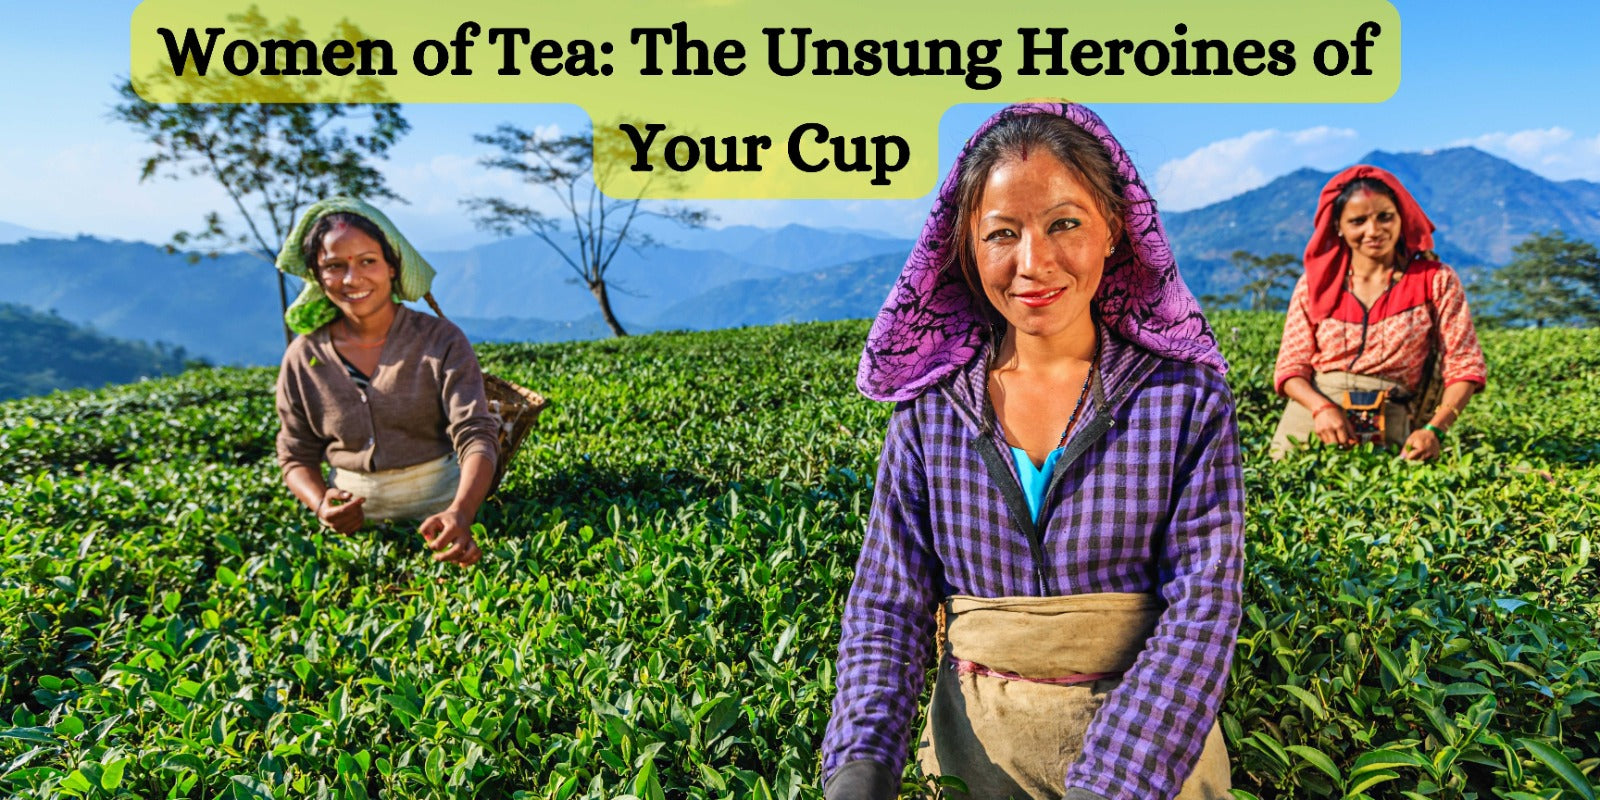 Women of Tea: The Unsung Heroines of Your Cup